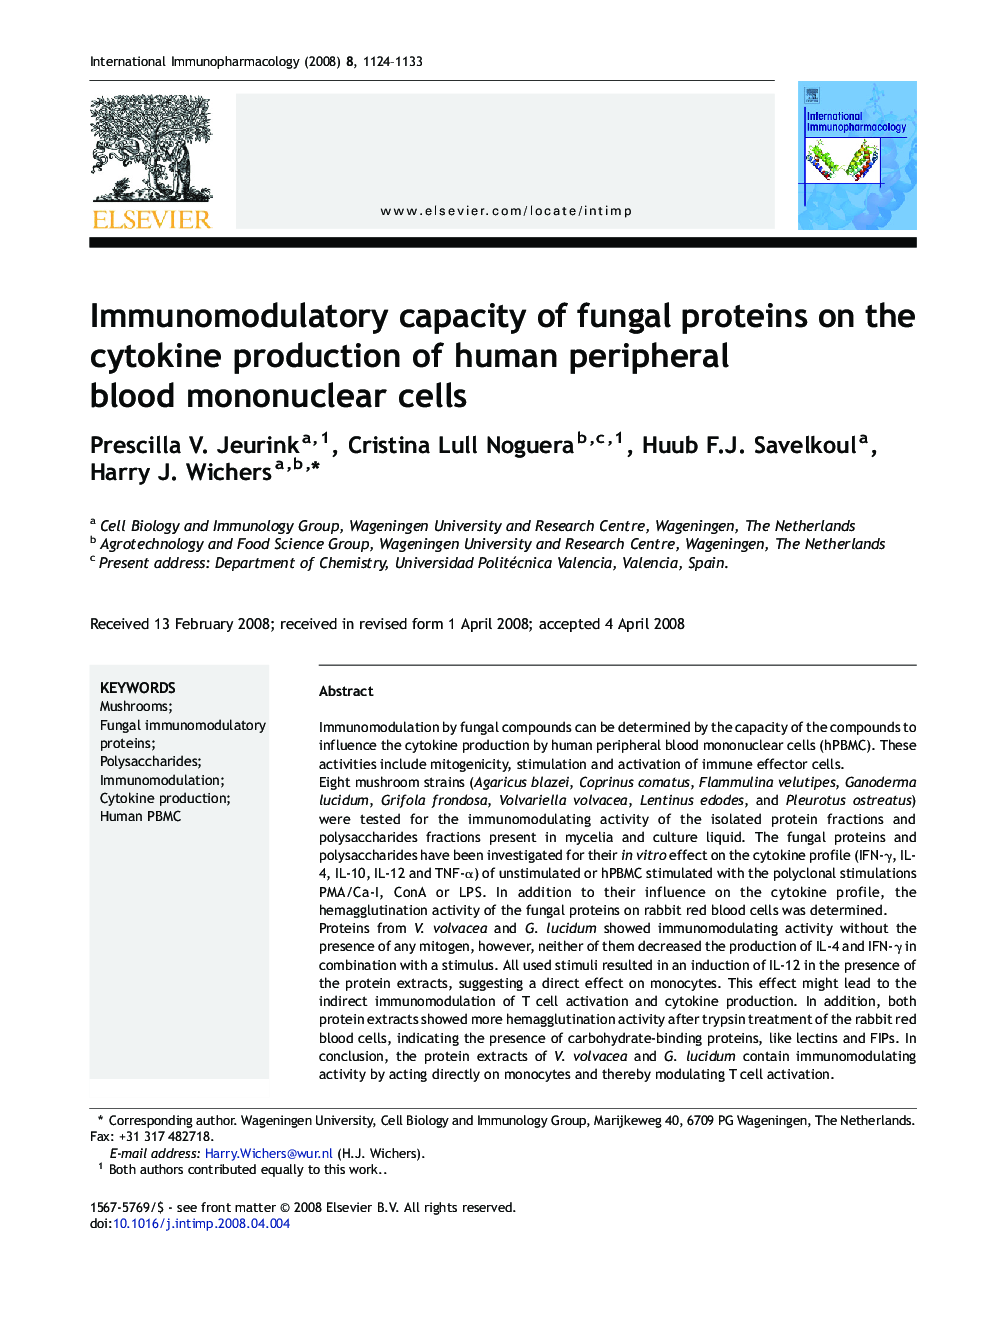 Immunomodulatory capacity of fungal proteins on the cytokine production of human peripheral blood mononuclear cells